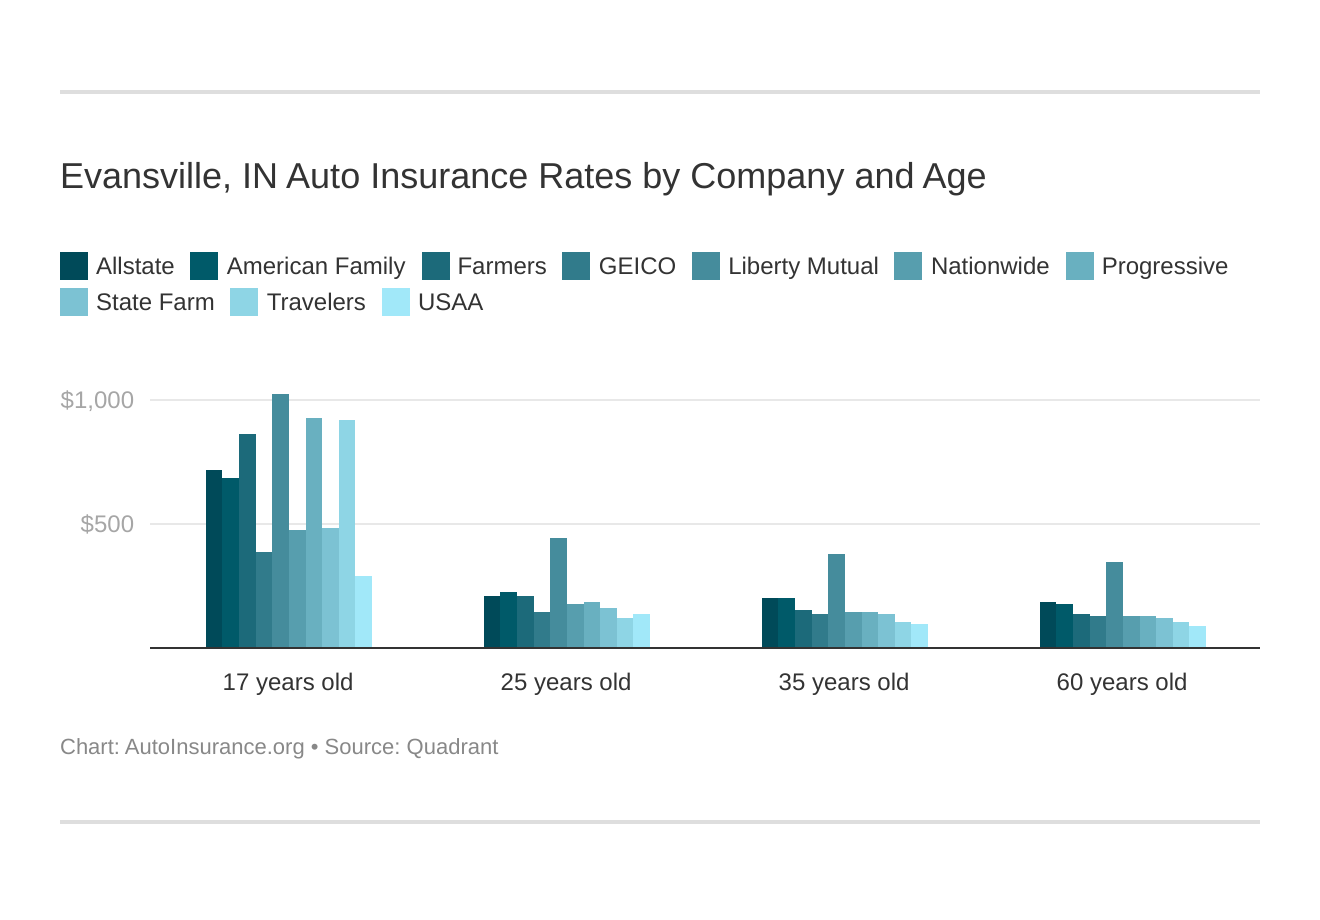 Evansville, IN Auto Insurance Rates by Company and Age